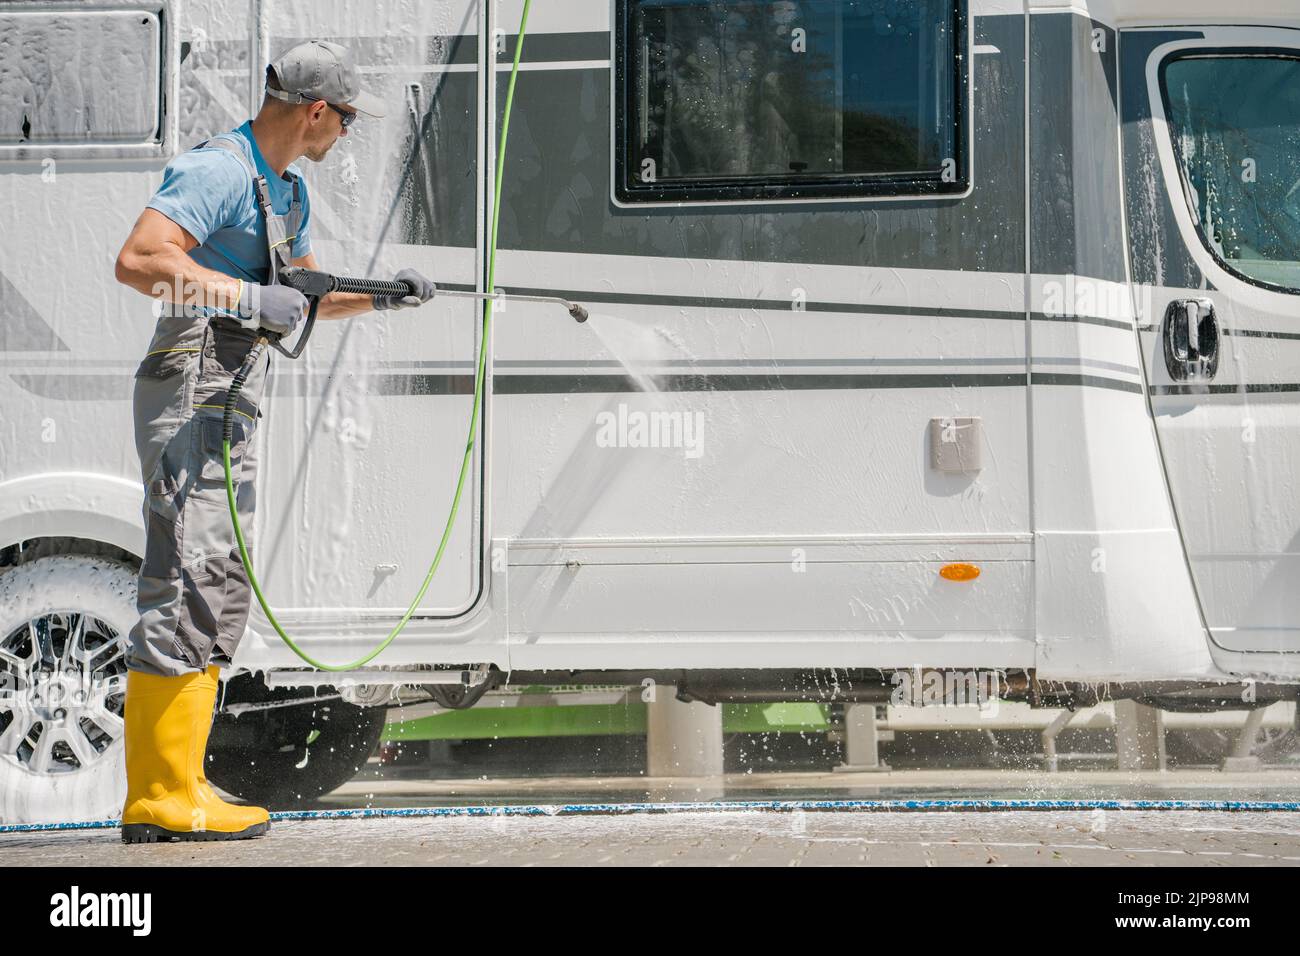 Caucasian Middle Aged Man in Rubber Boots Washing His White Camper Van with Pressure Washer at Self-Service Car Wash. Horizontal Photo. Motorhome Care Stock Photo